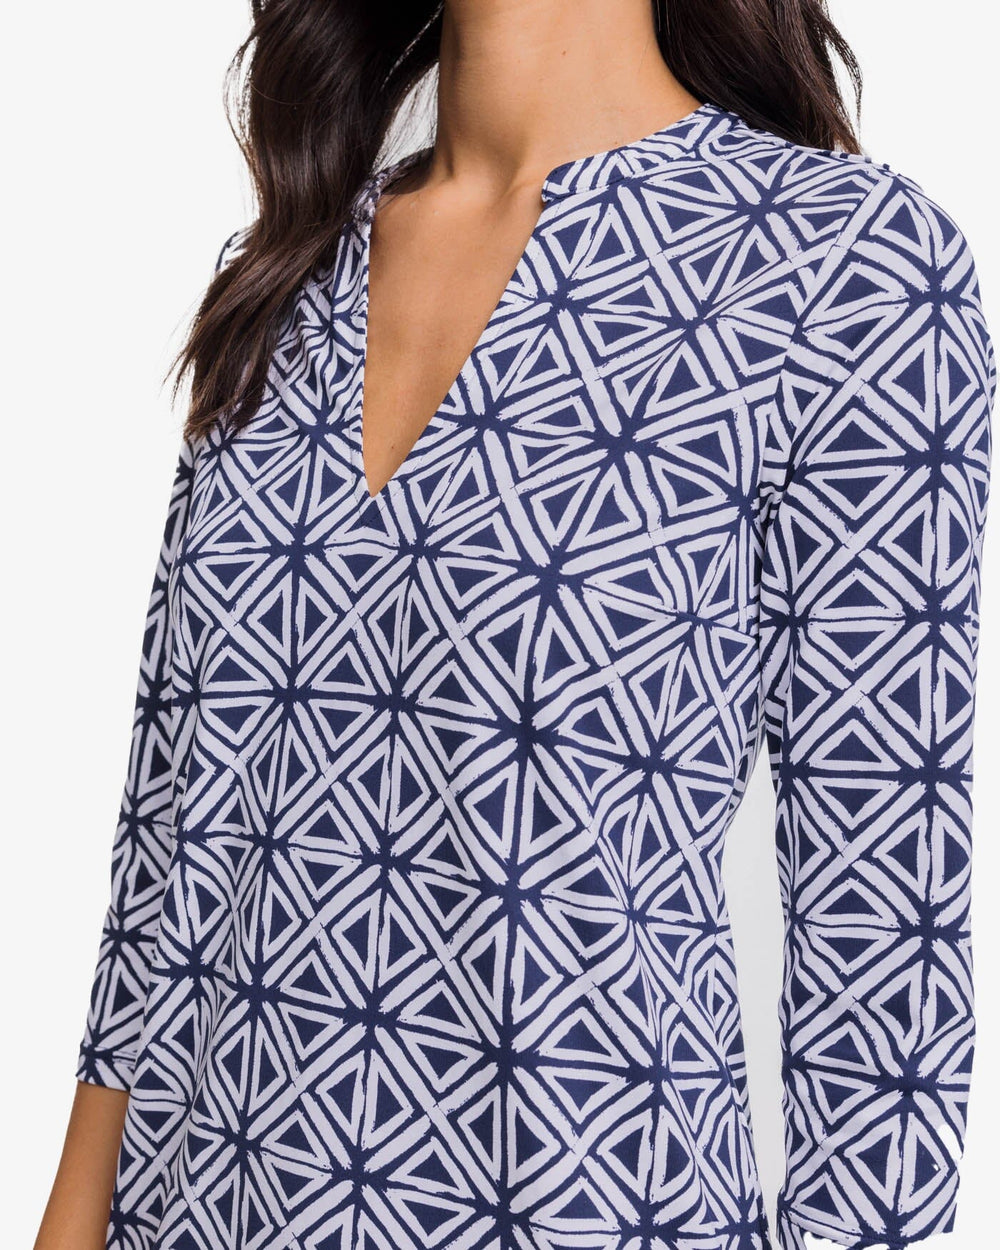 The detail view of the Southern Tide Alicia Painted Geo Performance Dress by Southern Tide - Nautical Navy